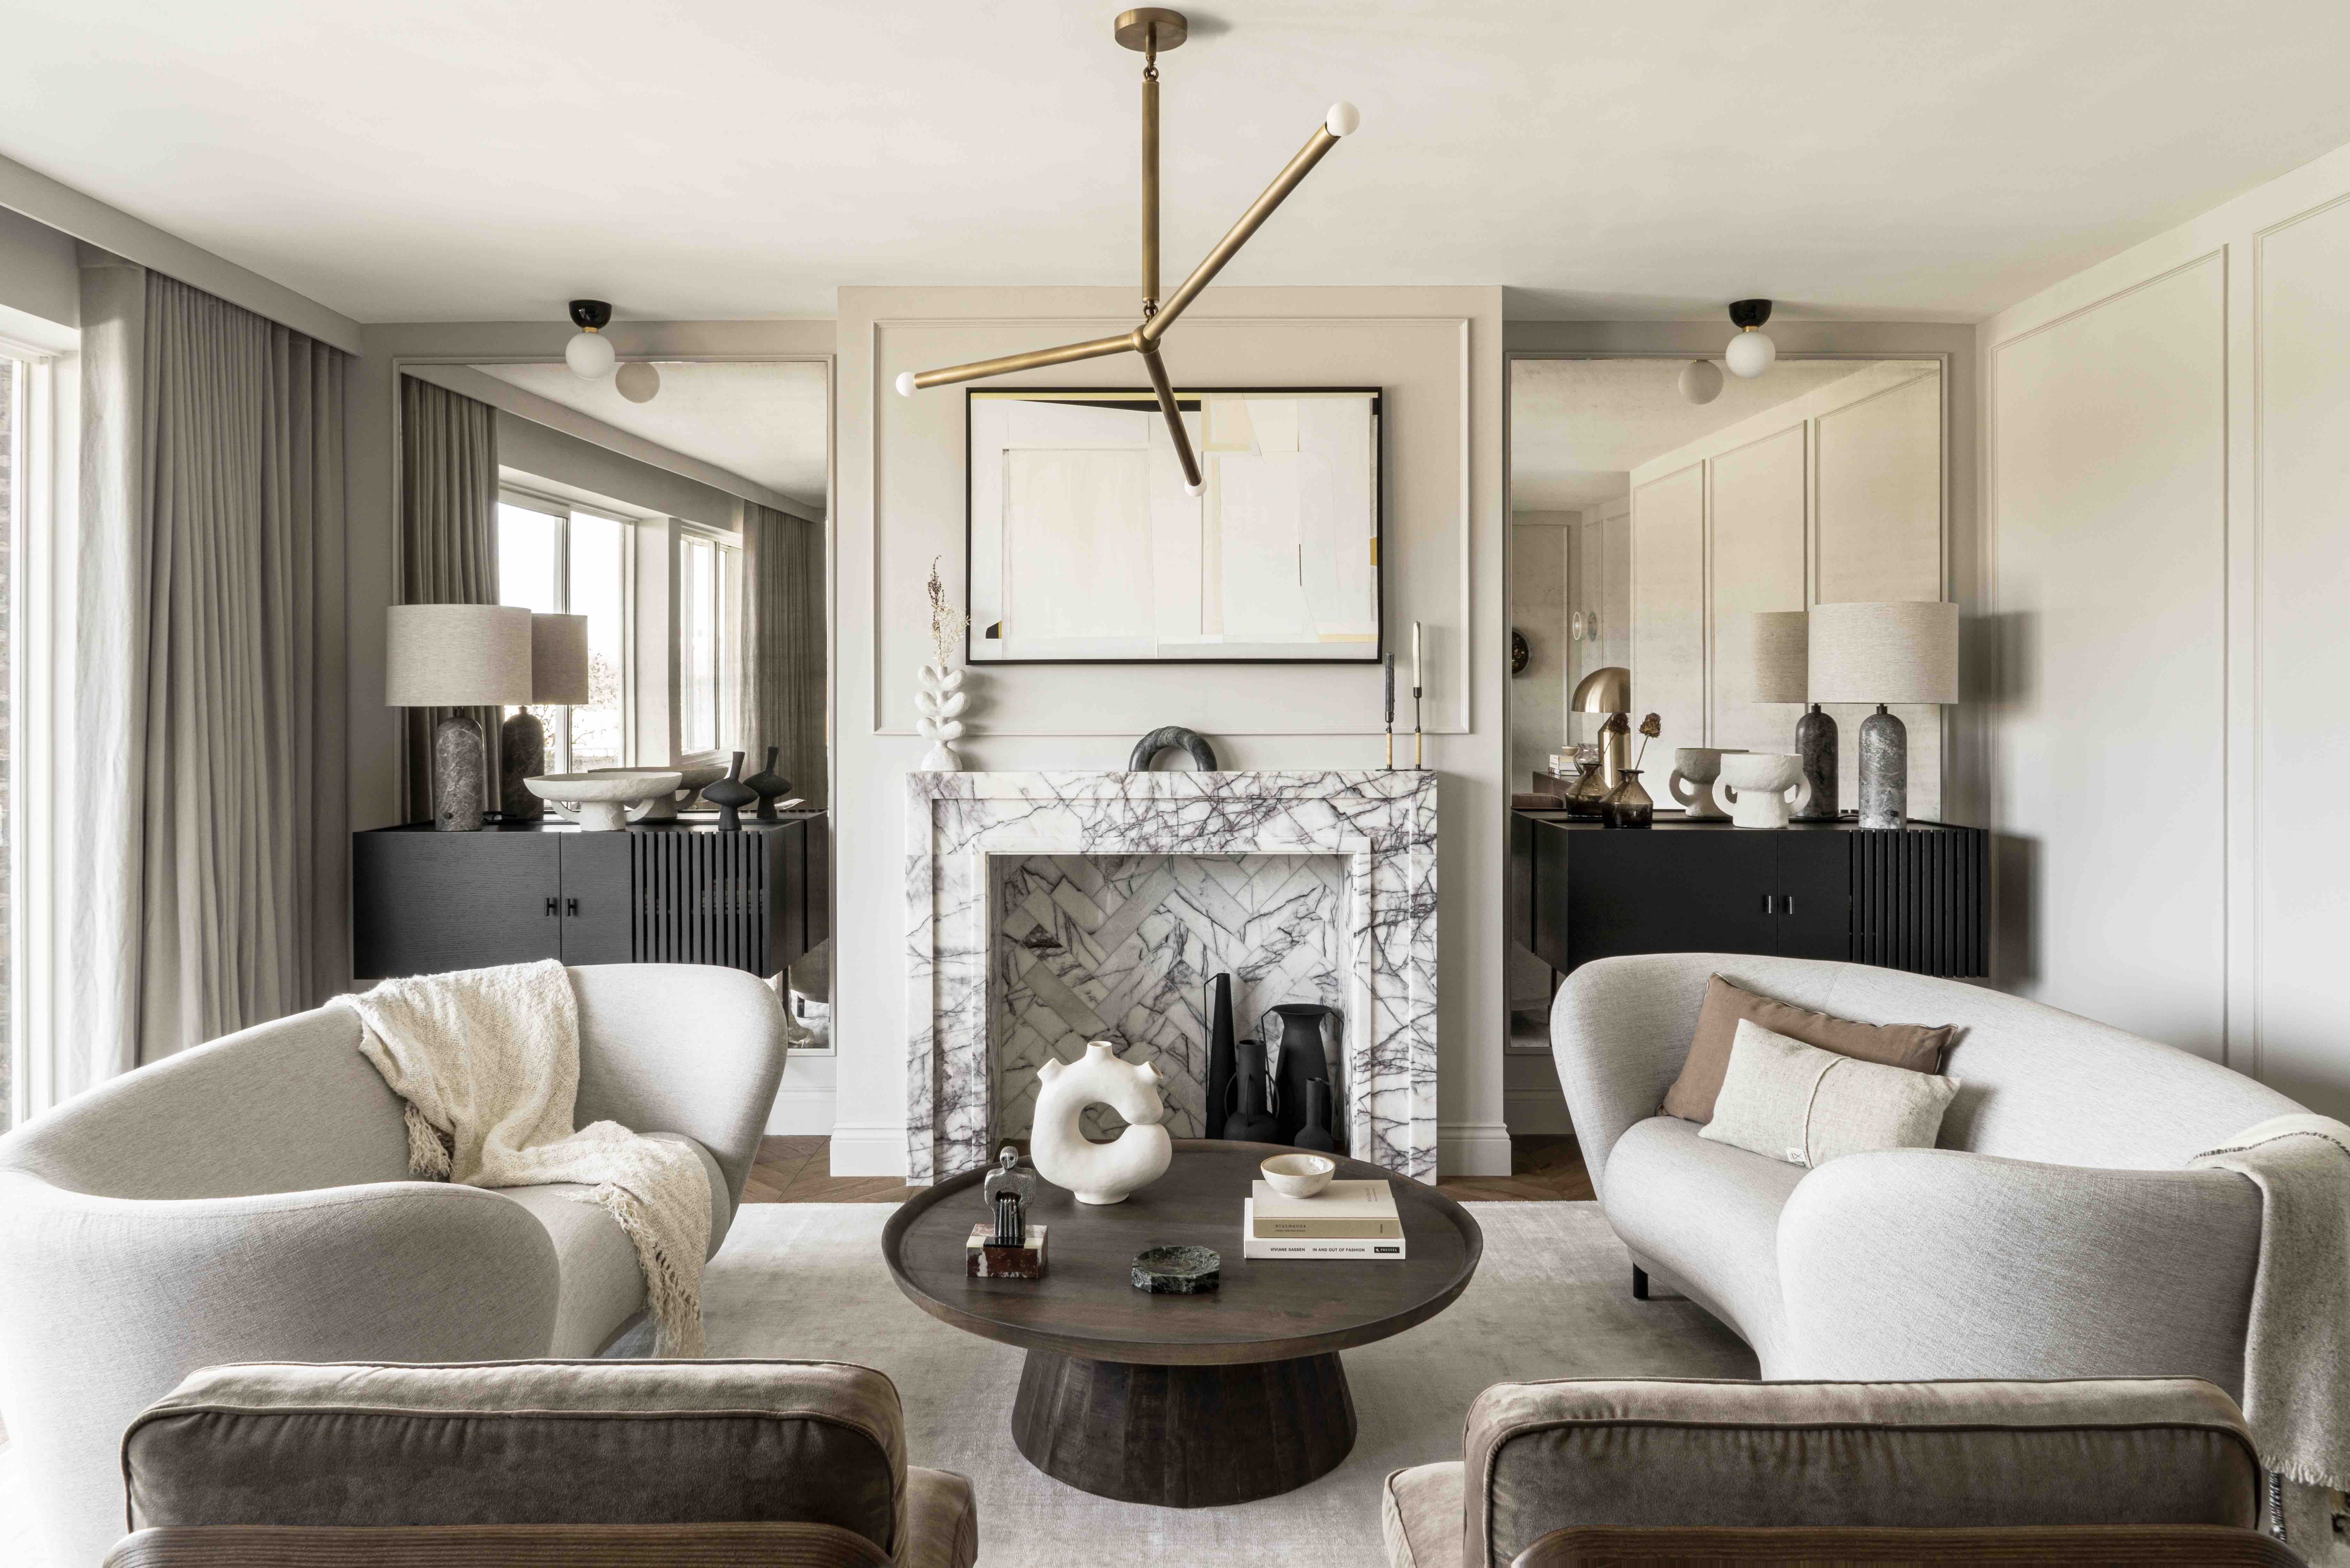 Luxury Interior Design: Top 10 Insider Tips to a High-End Interior